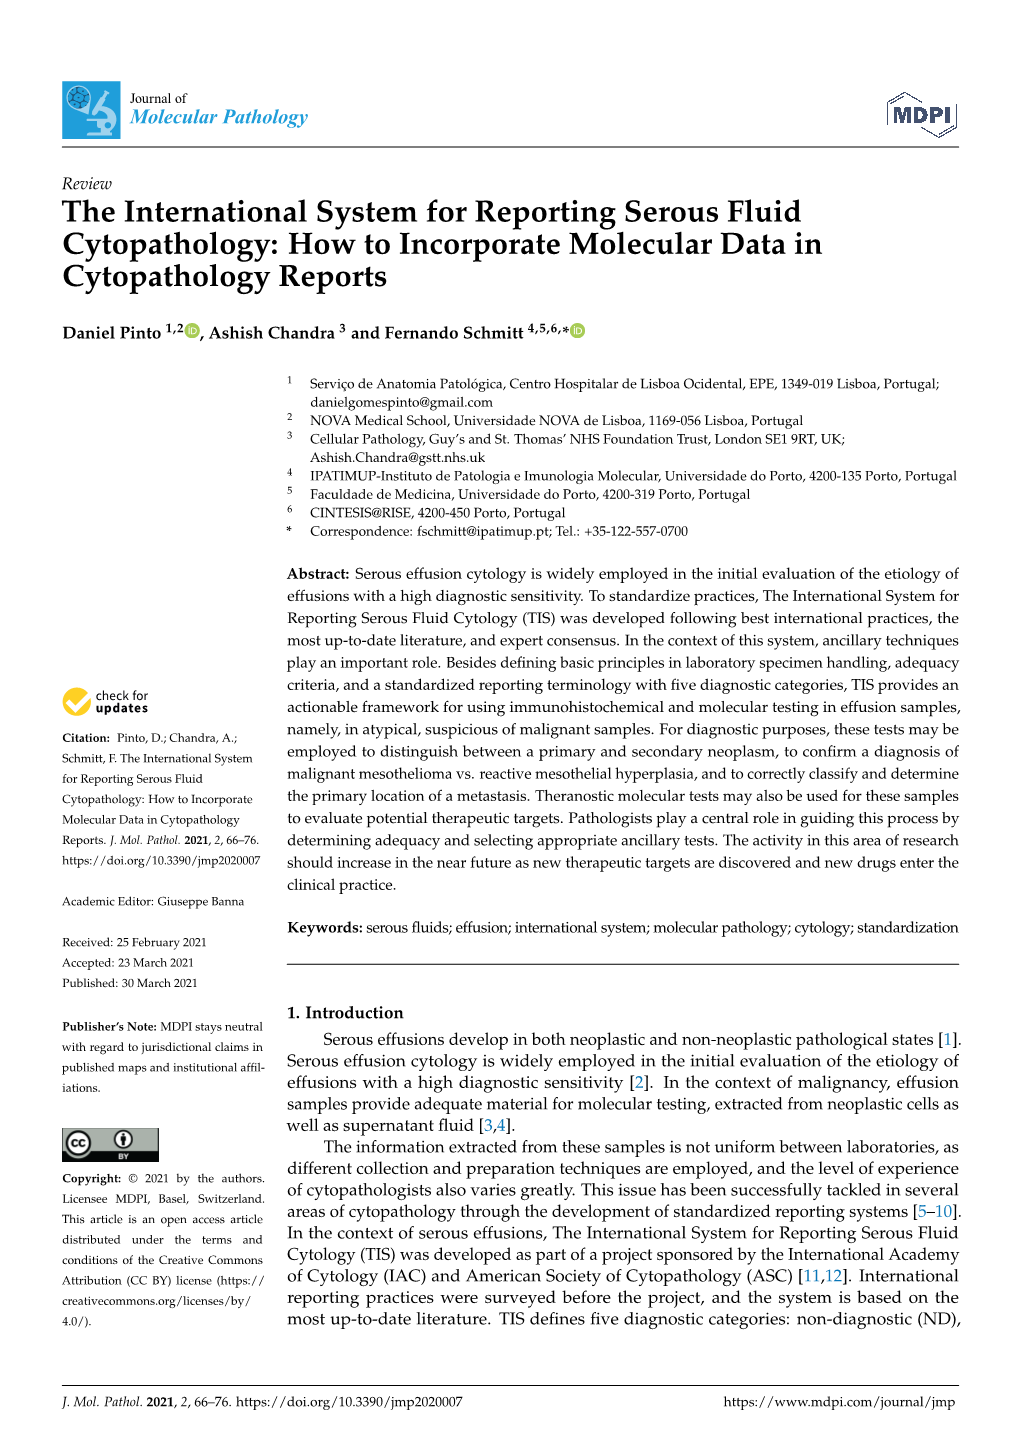 The International System for Reporting Serous Fluid Cytopathology: How to Incorporate Molecular Data in Cytopathology Reports